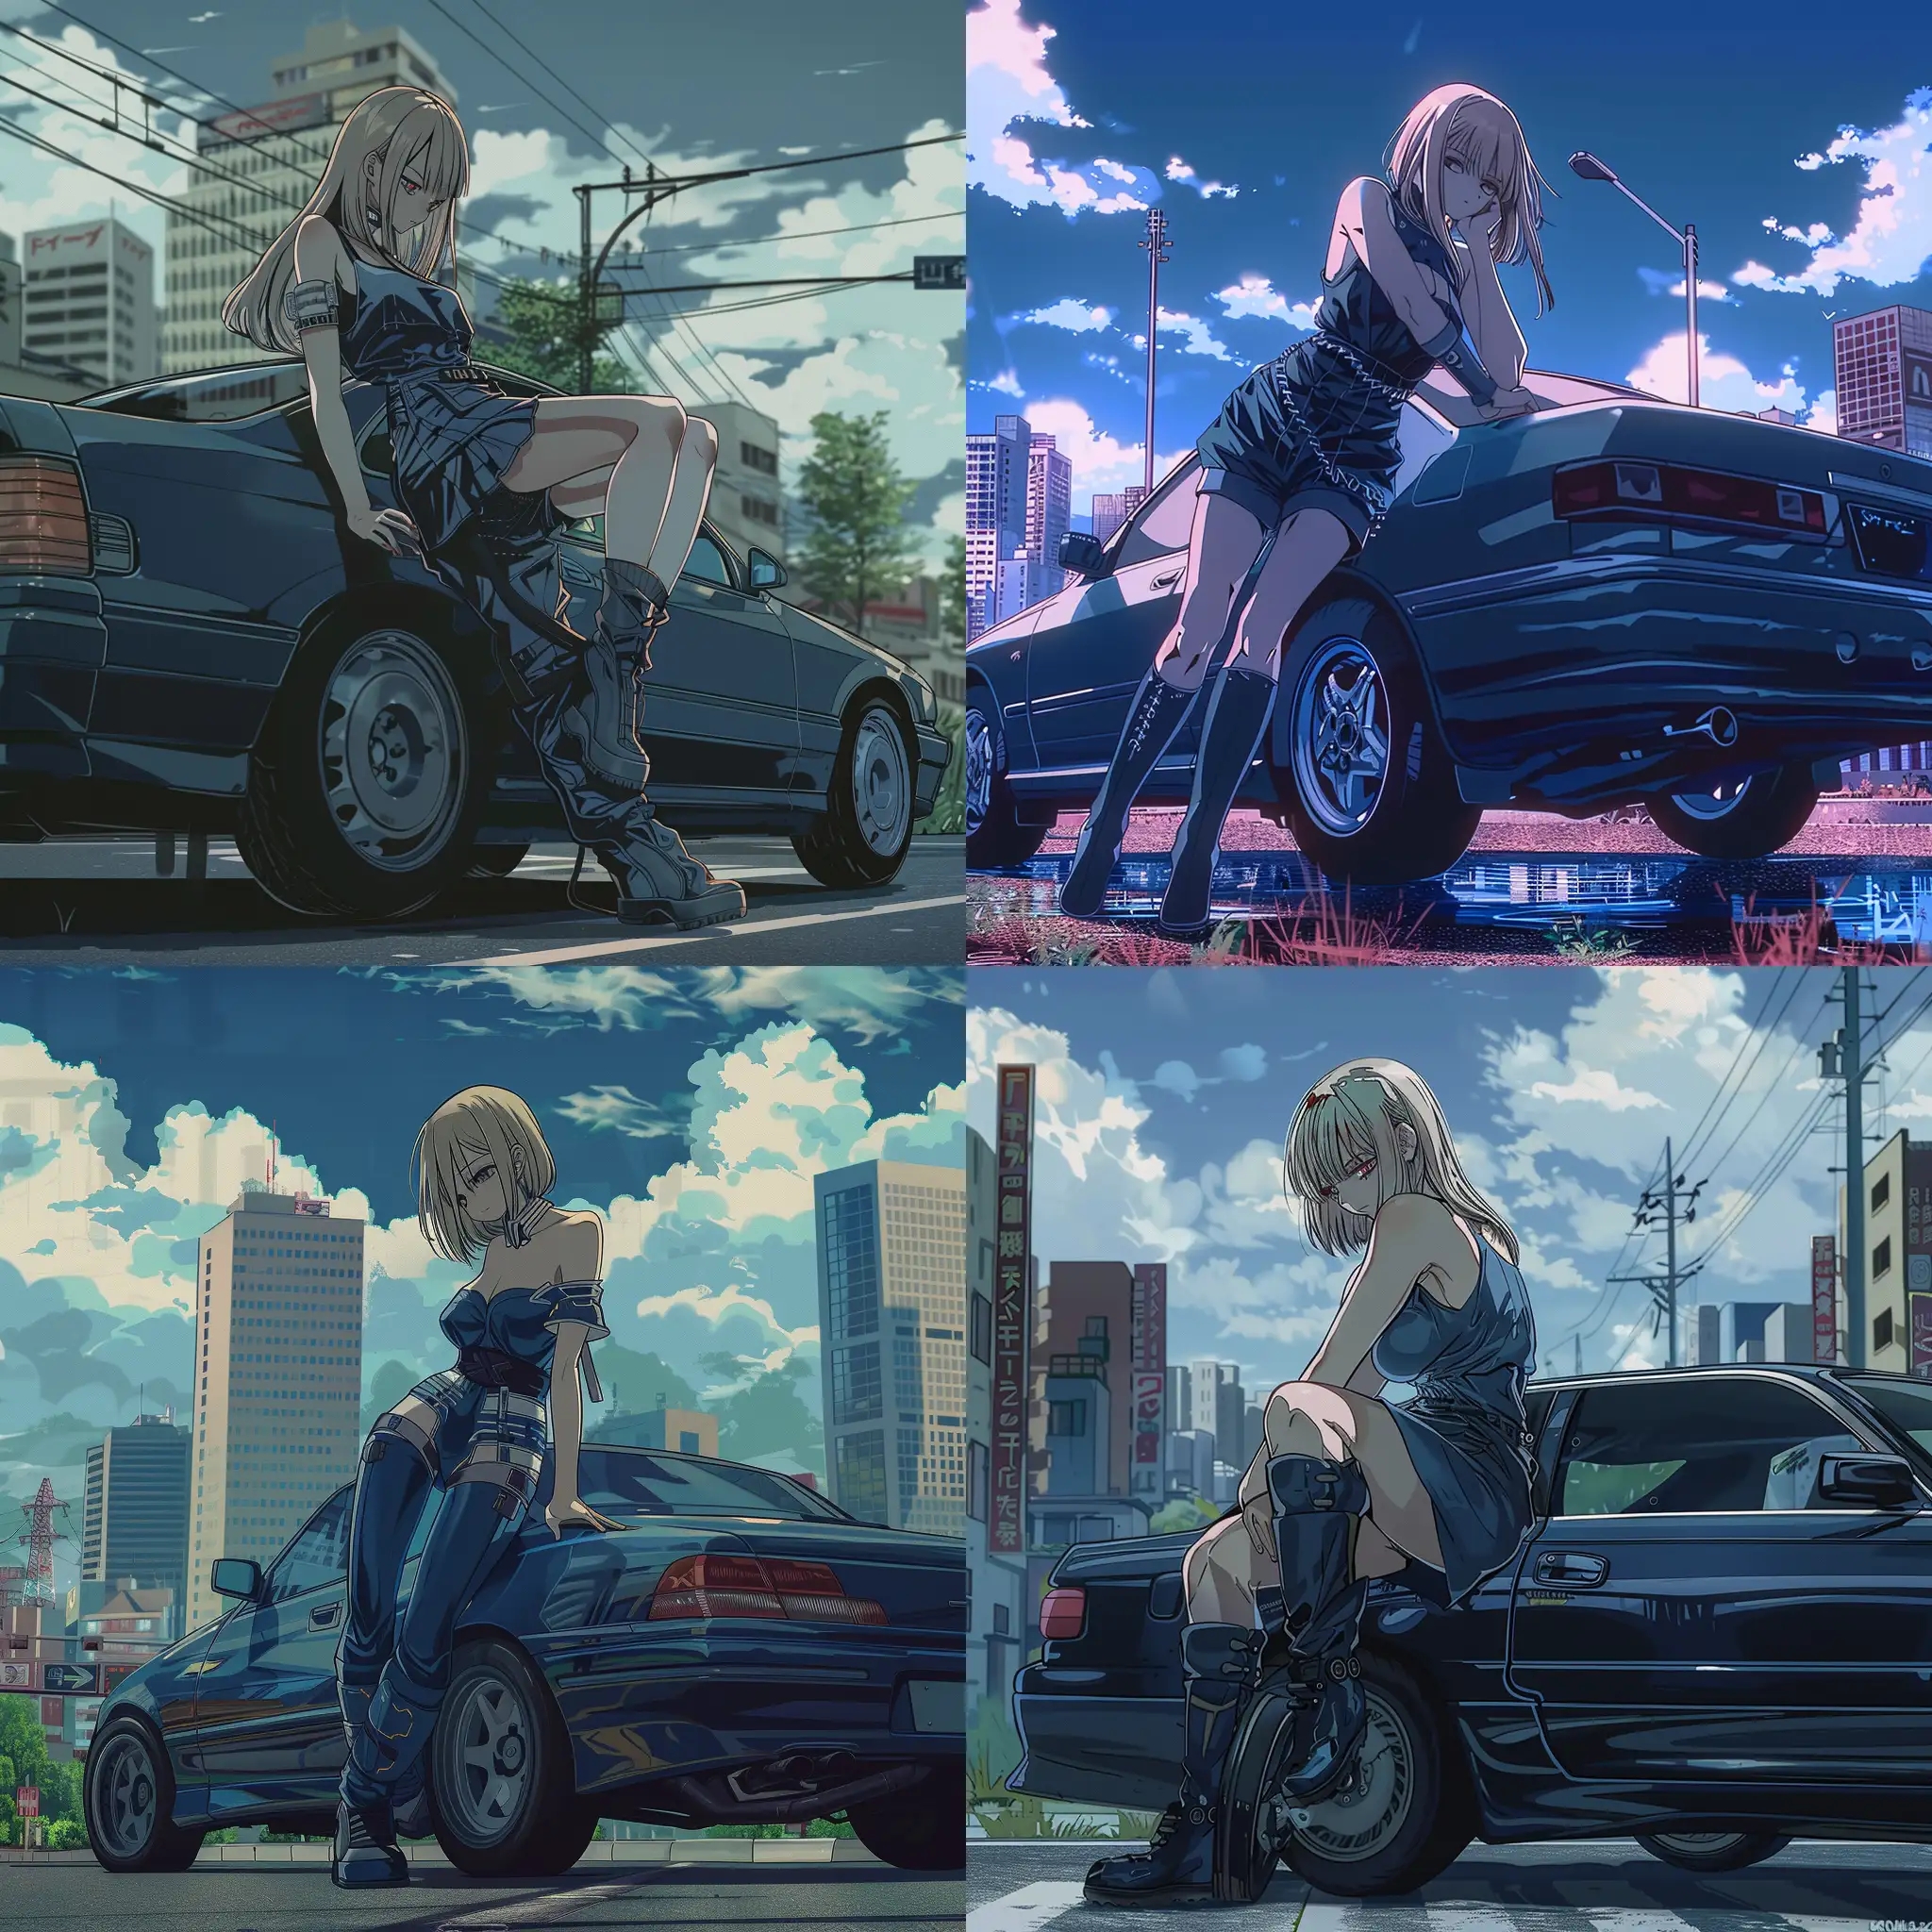 Cyberpunk-Anime-Character-Leaning-on-Car-Outside-City-in-Biker-Suit